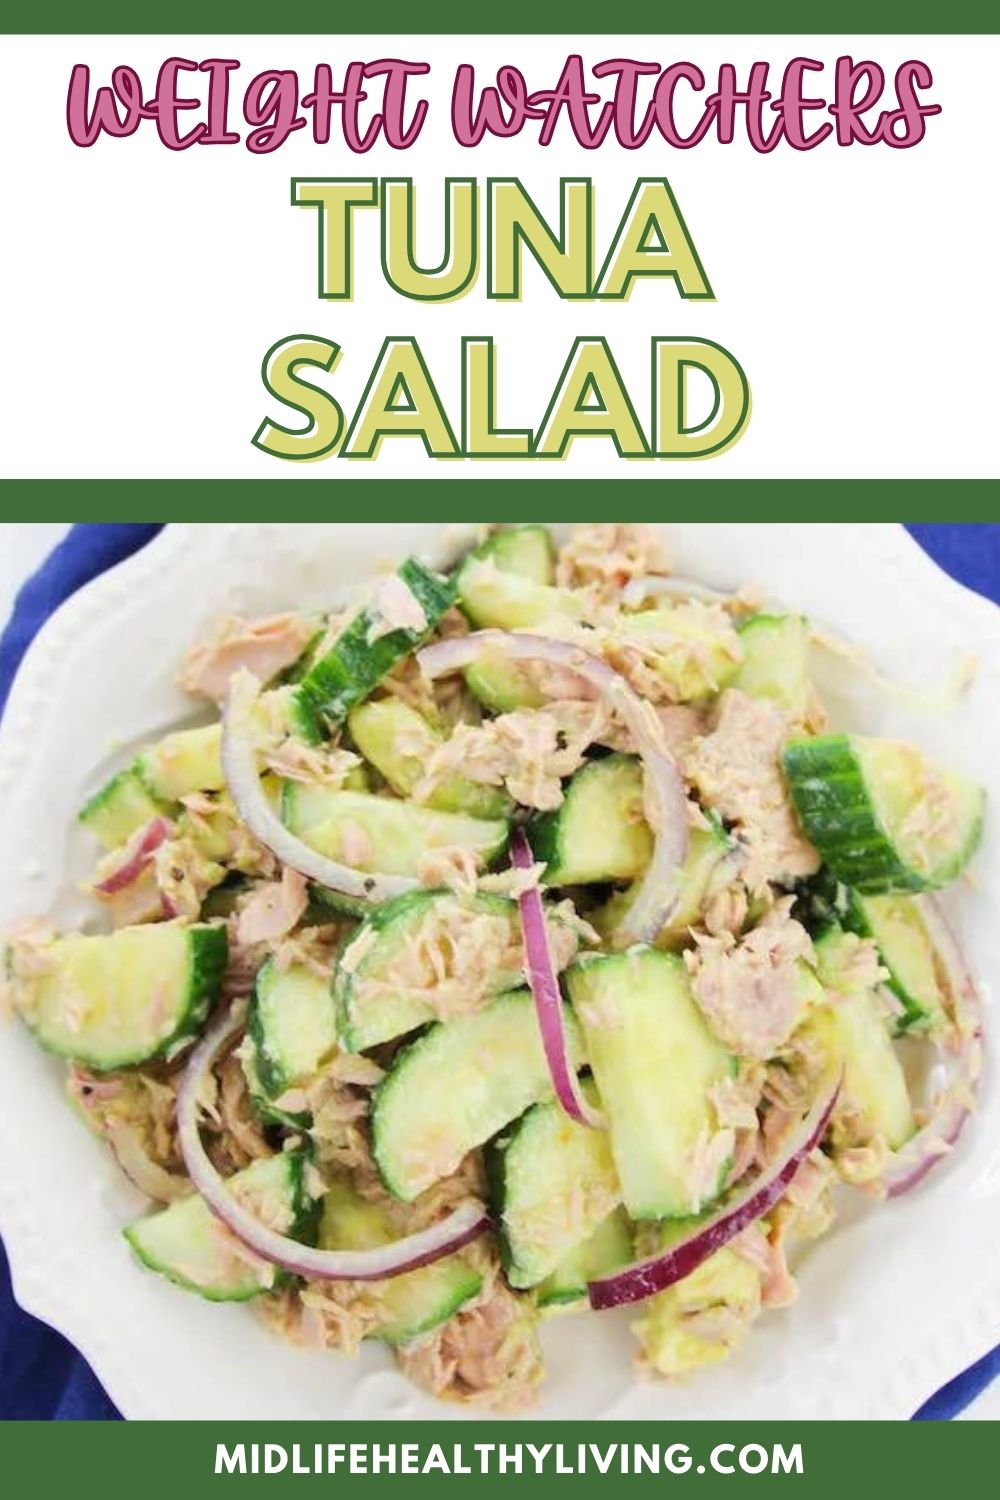 Pinterest image for Weight Watchers healthy tuna salad